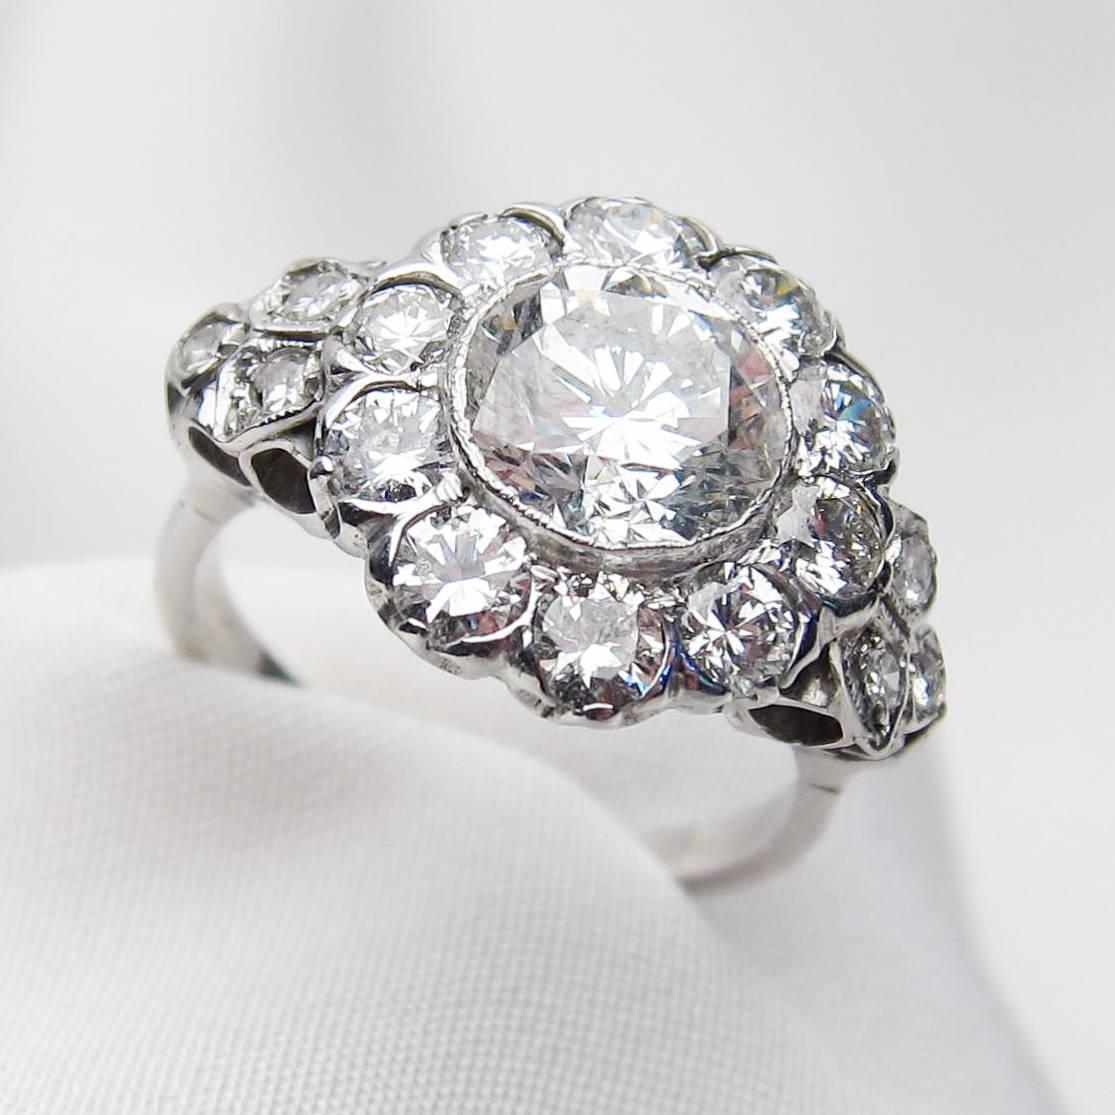 Art Deco 3.19 Carat Diamond 18 Karat White Gold Halo Engagement Ring In Excellent Condition For Sale In Seattle, WA